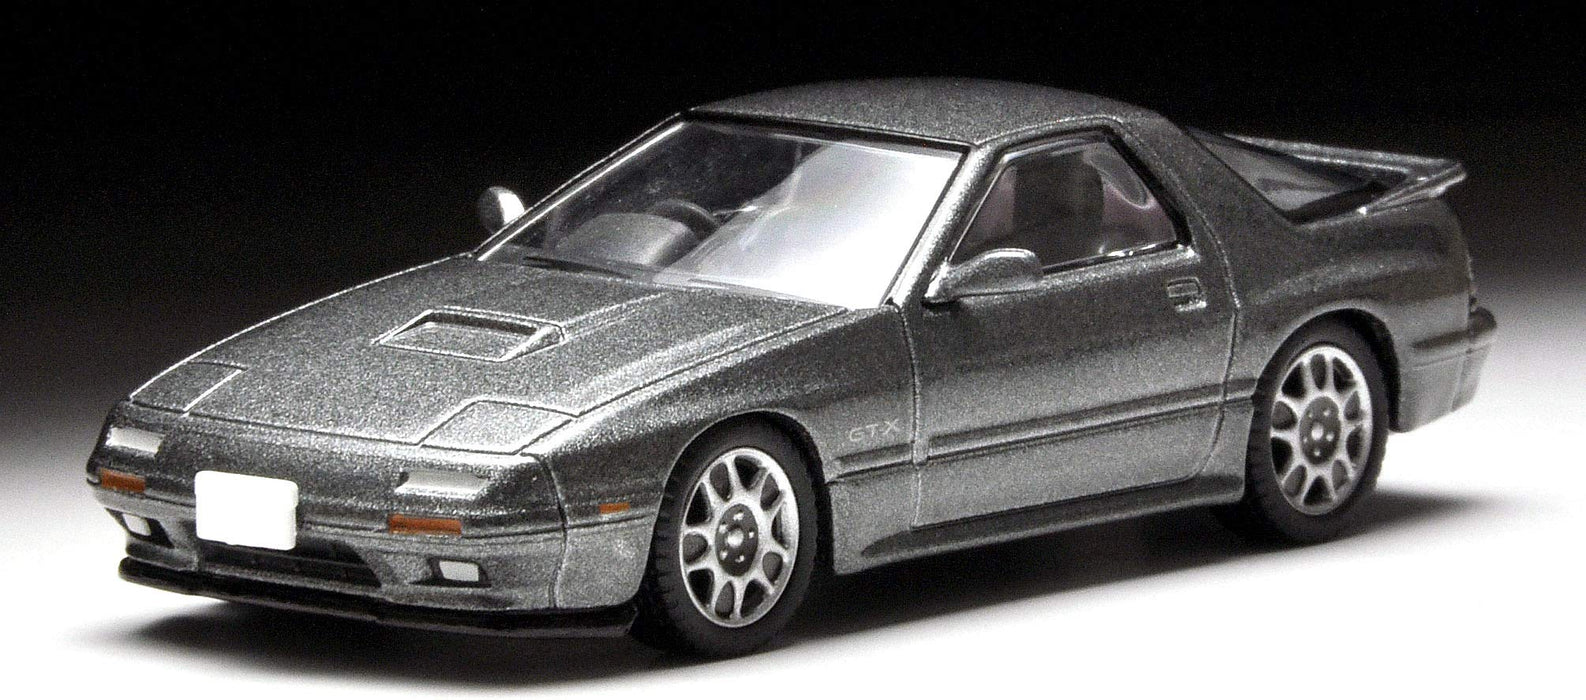 TOMICA LIMITED VINTAGE NEO LV-N192a MAZDA SAVANNA RX-7 GT-X 1989 Gray 307631 NEW_8